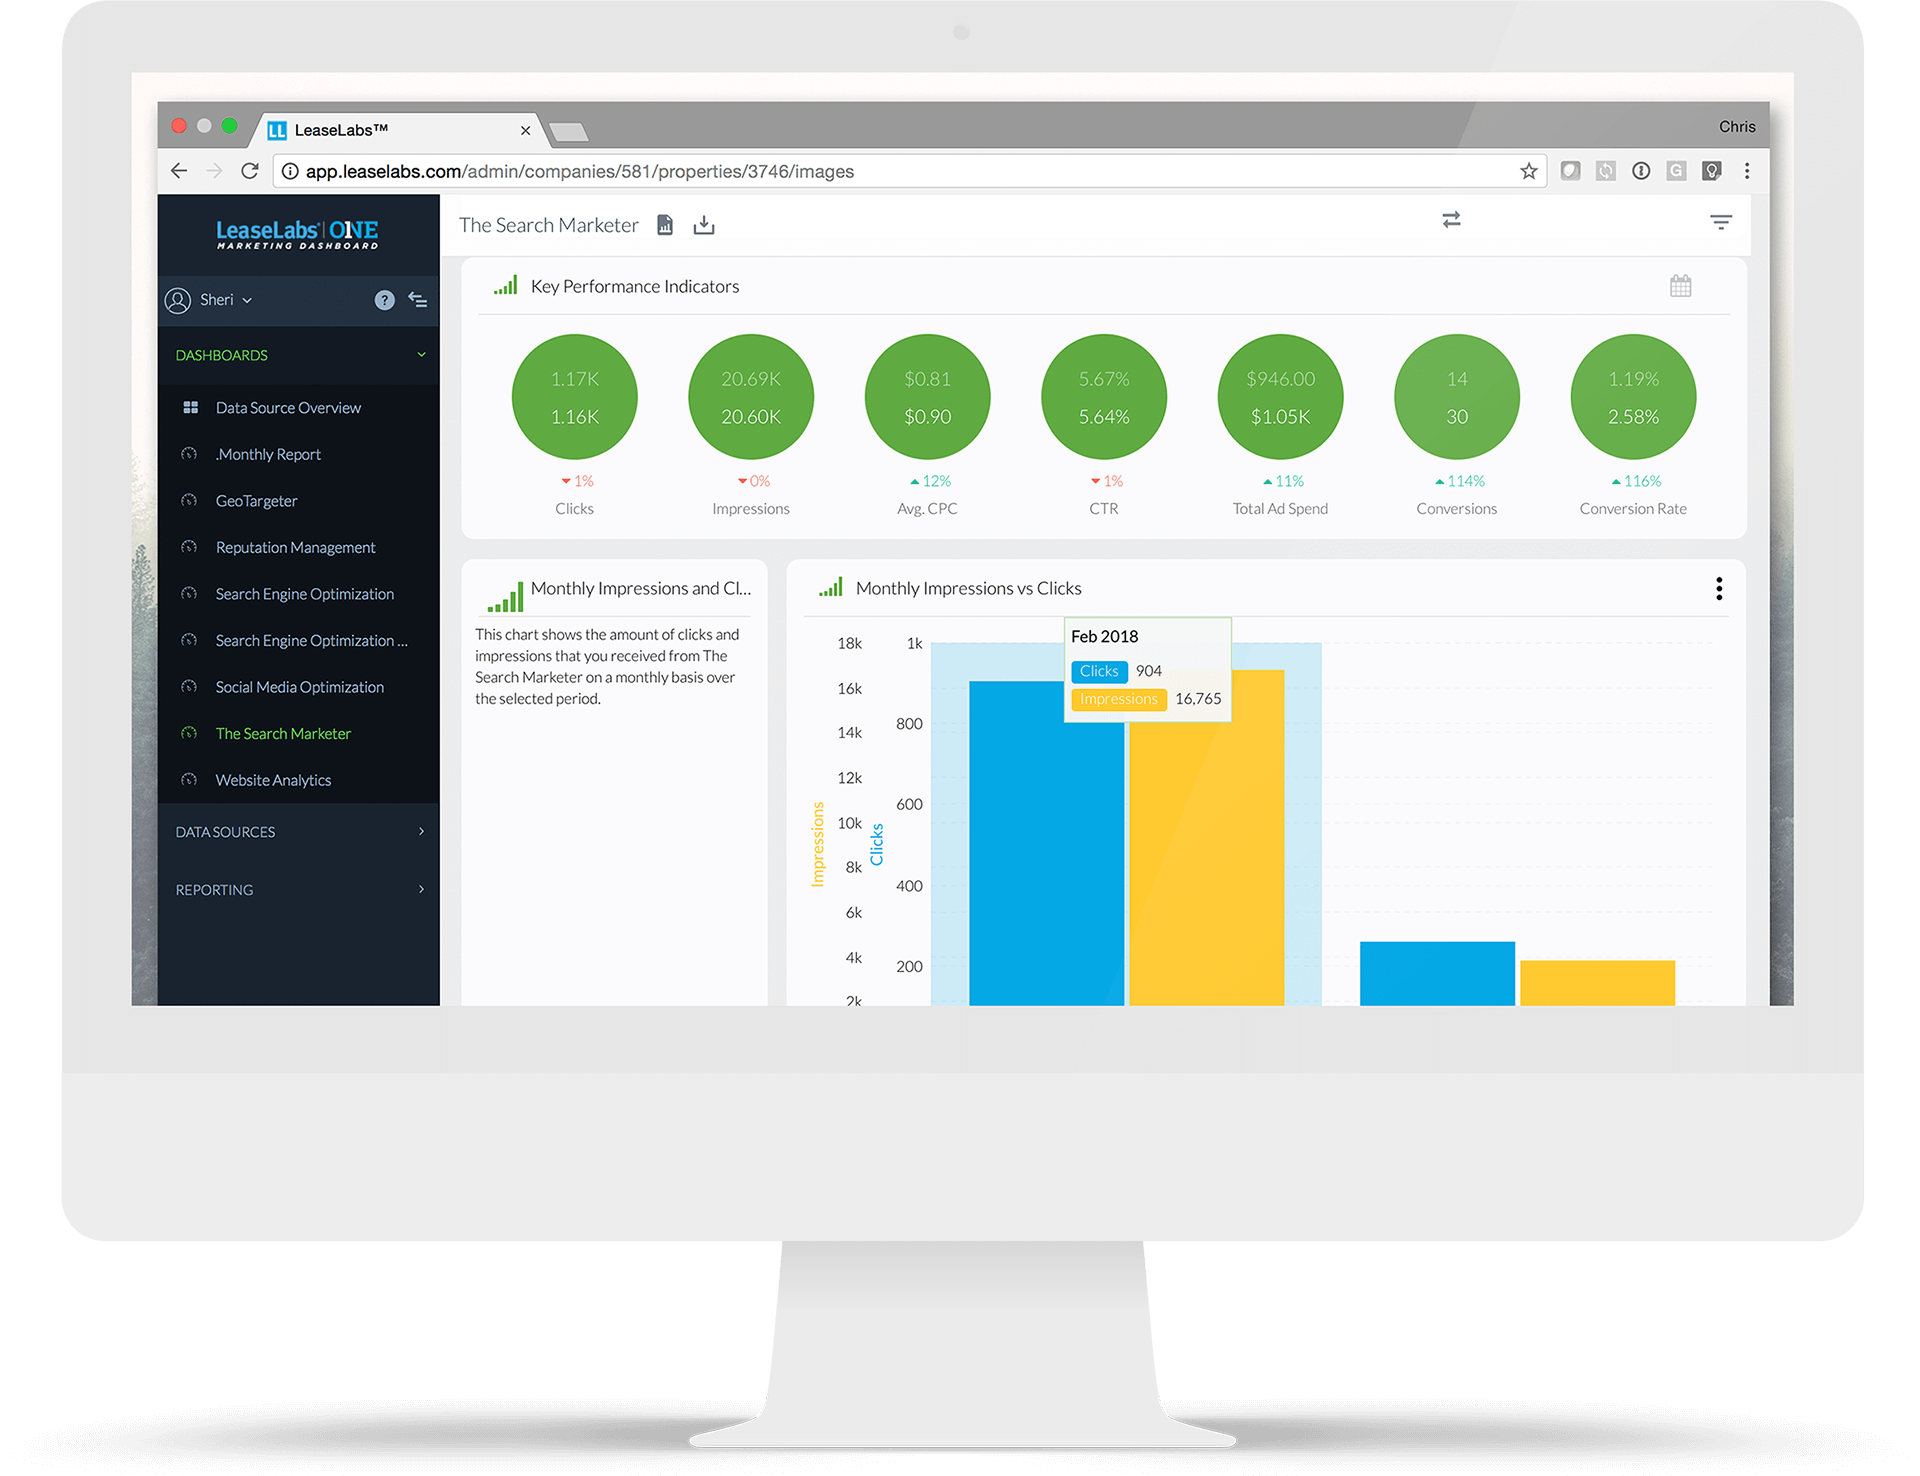 Computer Monitor with LeaseLabs One Search Marketer Dashboard